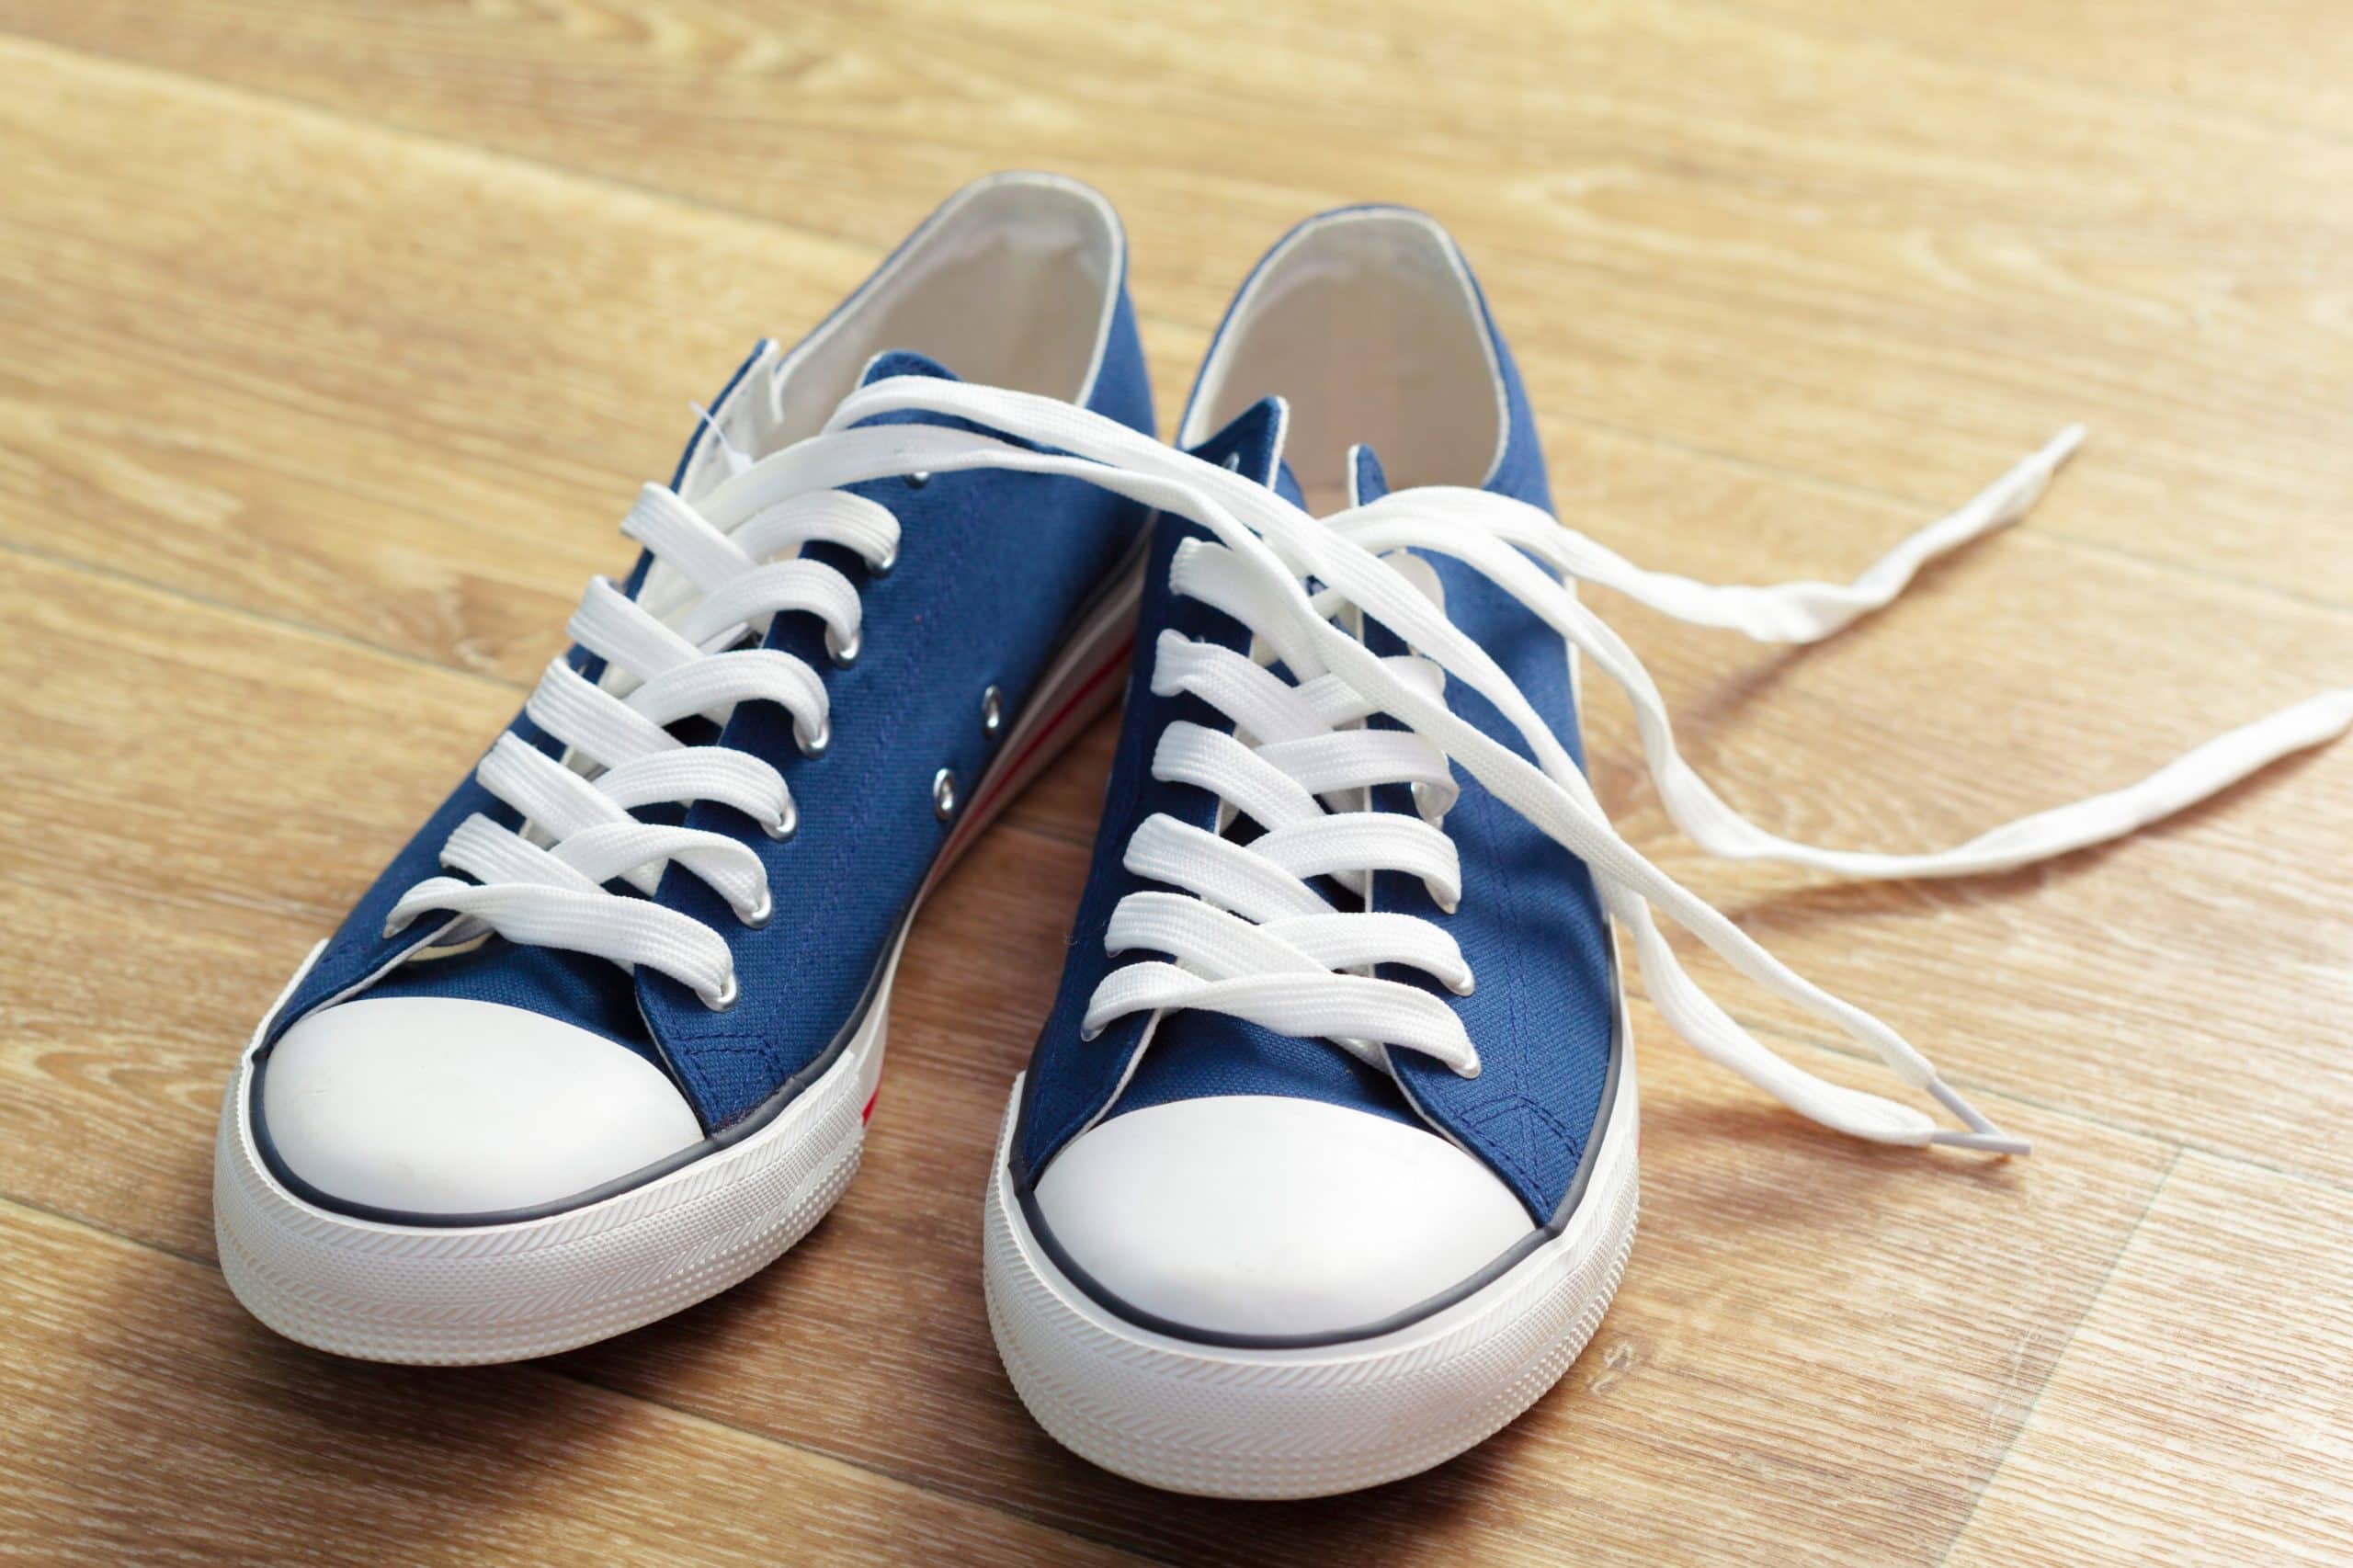 The Only “How To Clean Shoelaces” Guide You’ll Ever Need